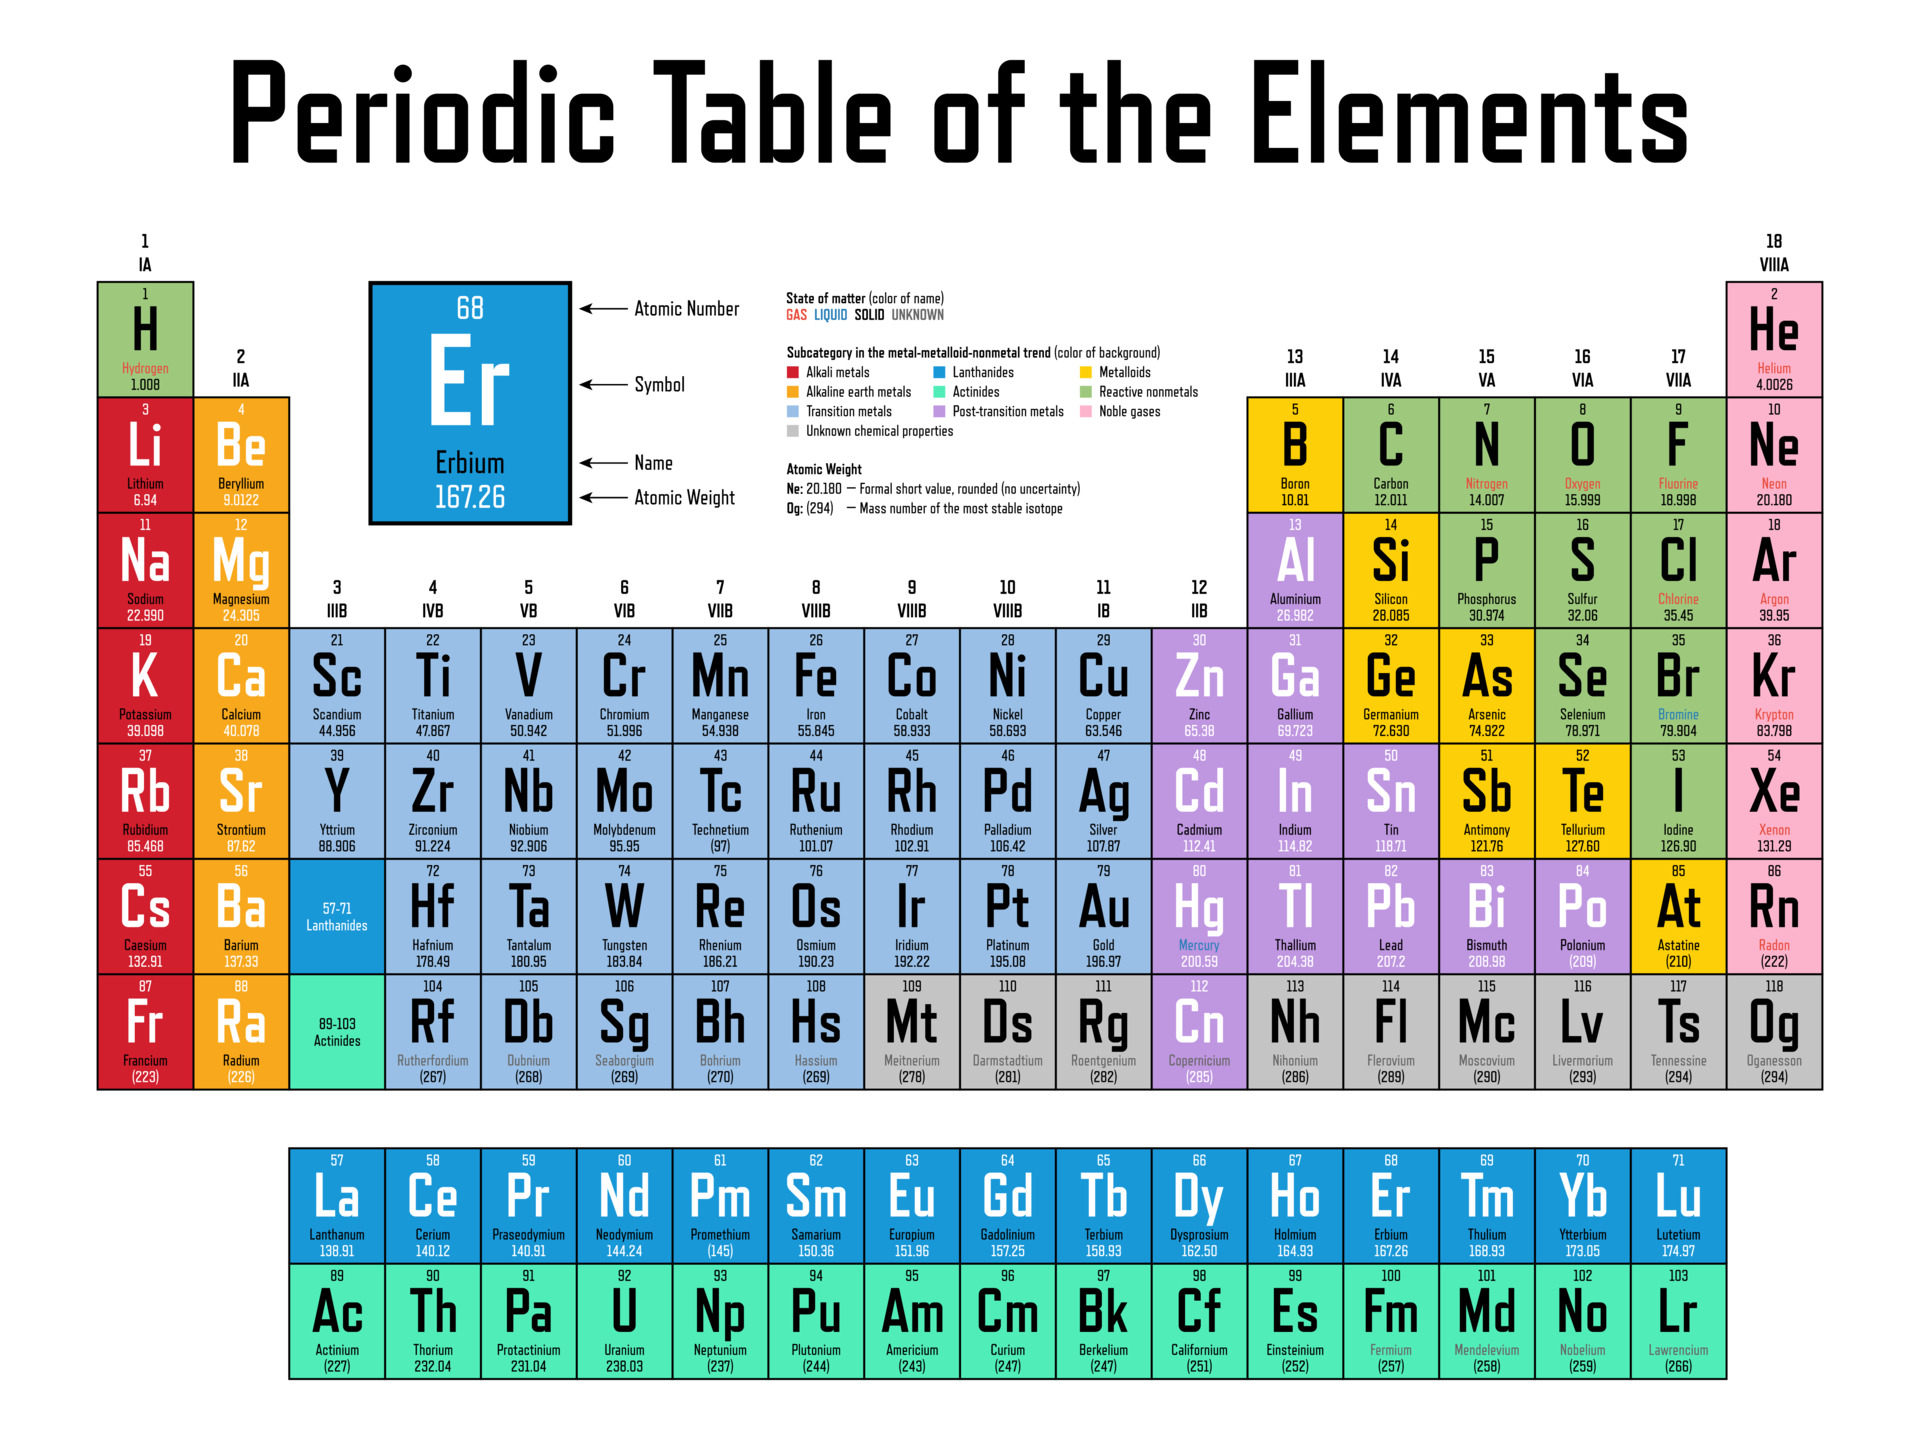 Chemistry Worksheet Bundle: Elements and the Organization of the Periodic Table